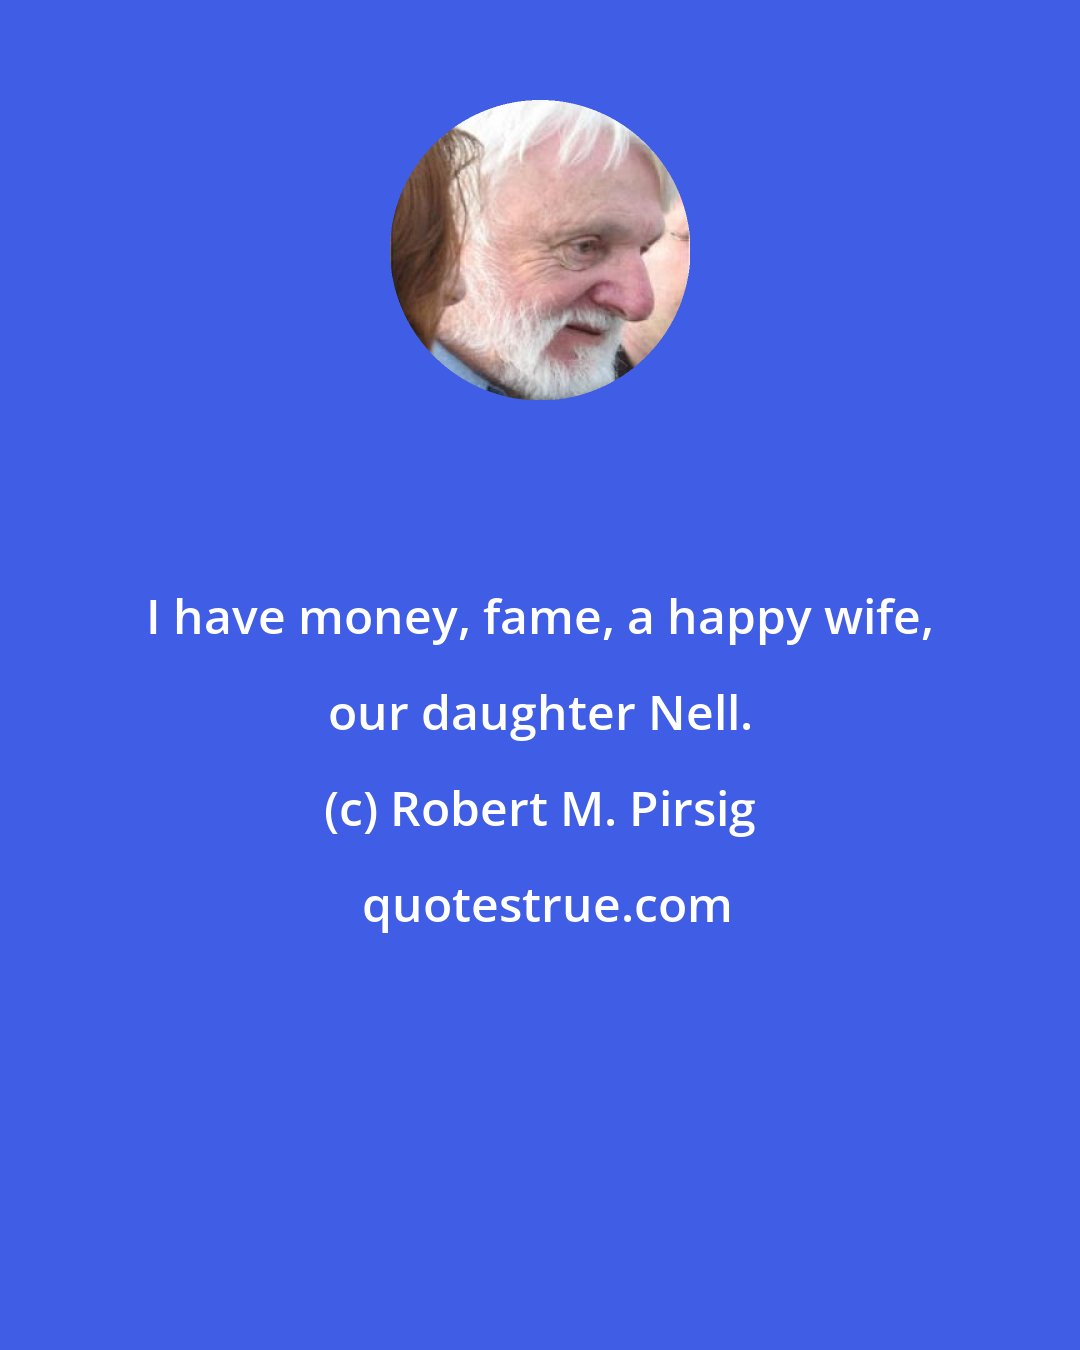 Robert M. Pirsig: I have money, fame, a happy wife, our daughter Nell.